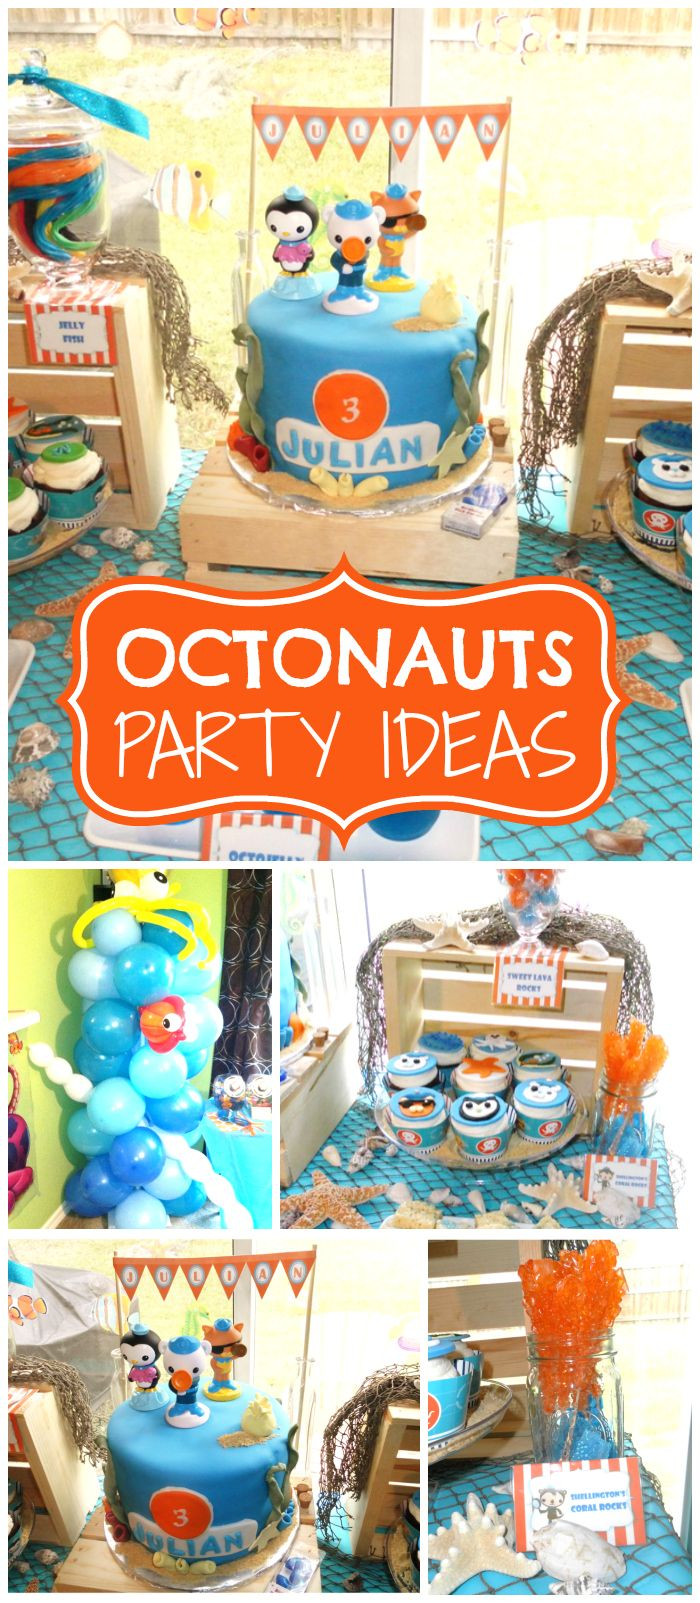 Octonauts Birthday Party Decorations
 An Octonauts themed birthday party with fun party